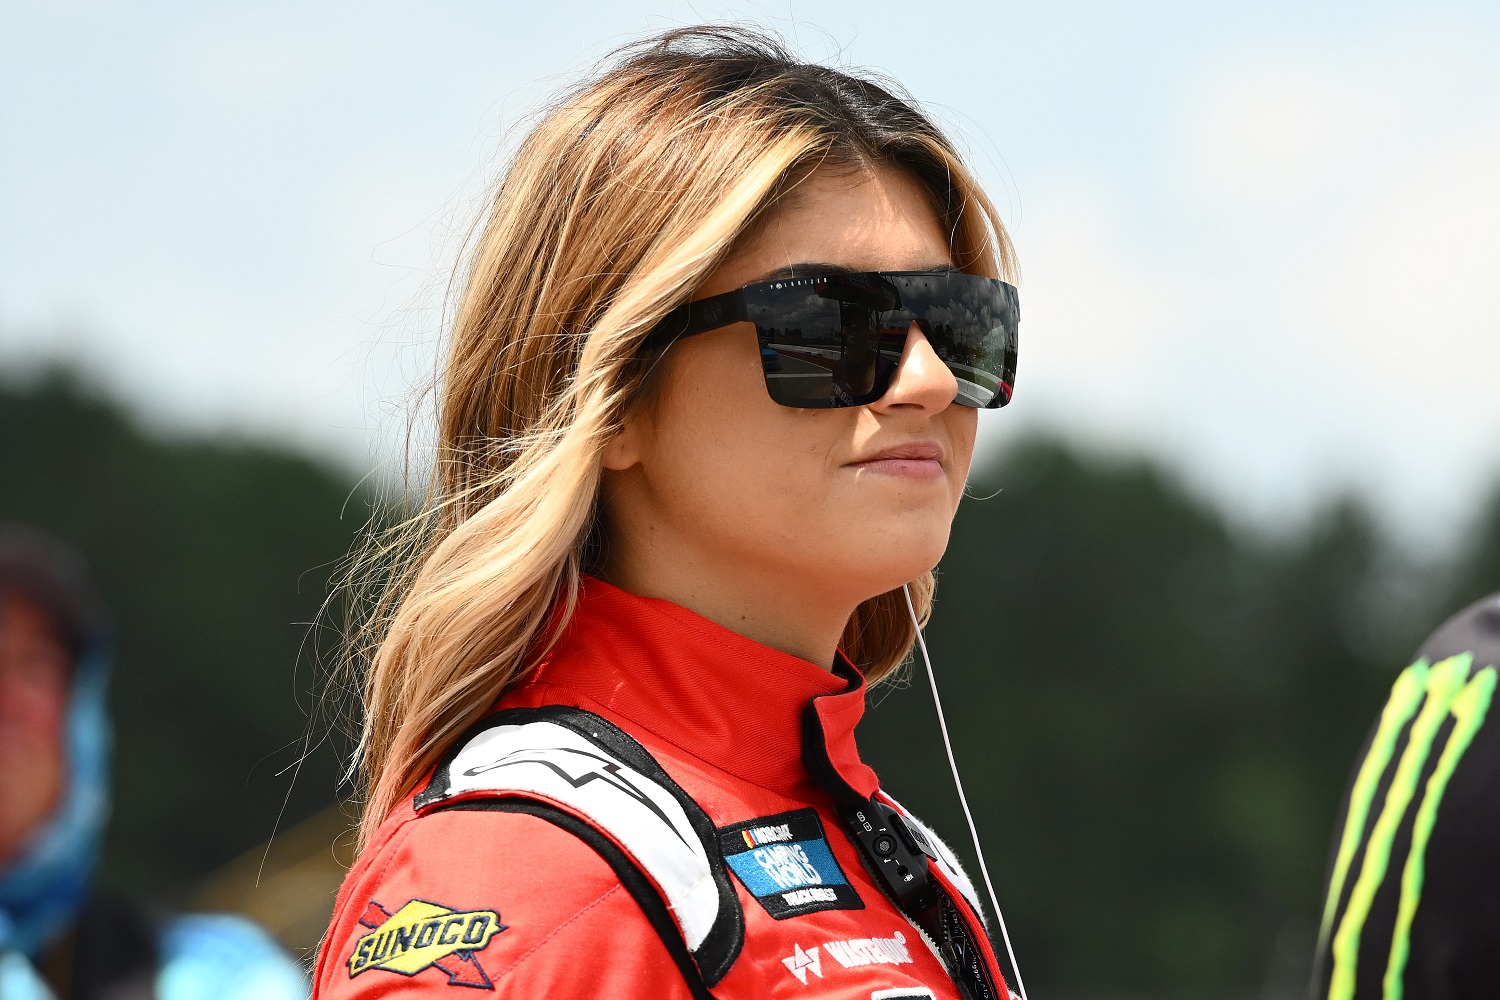 Hailie Deegan waits on the grid prior to the NASCAR Camping World Truck Series O'Reilly Auto Parts 150 at Mid-Ohio Sports Car Course on July 9, 2022.